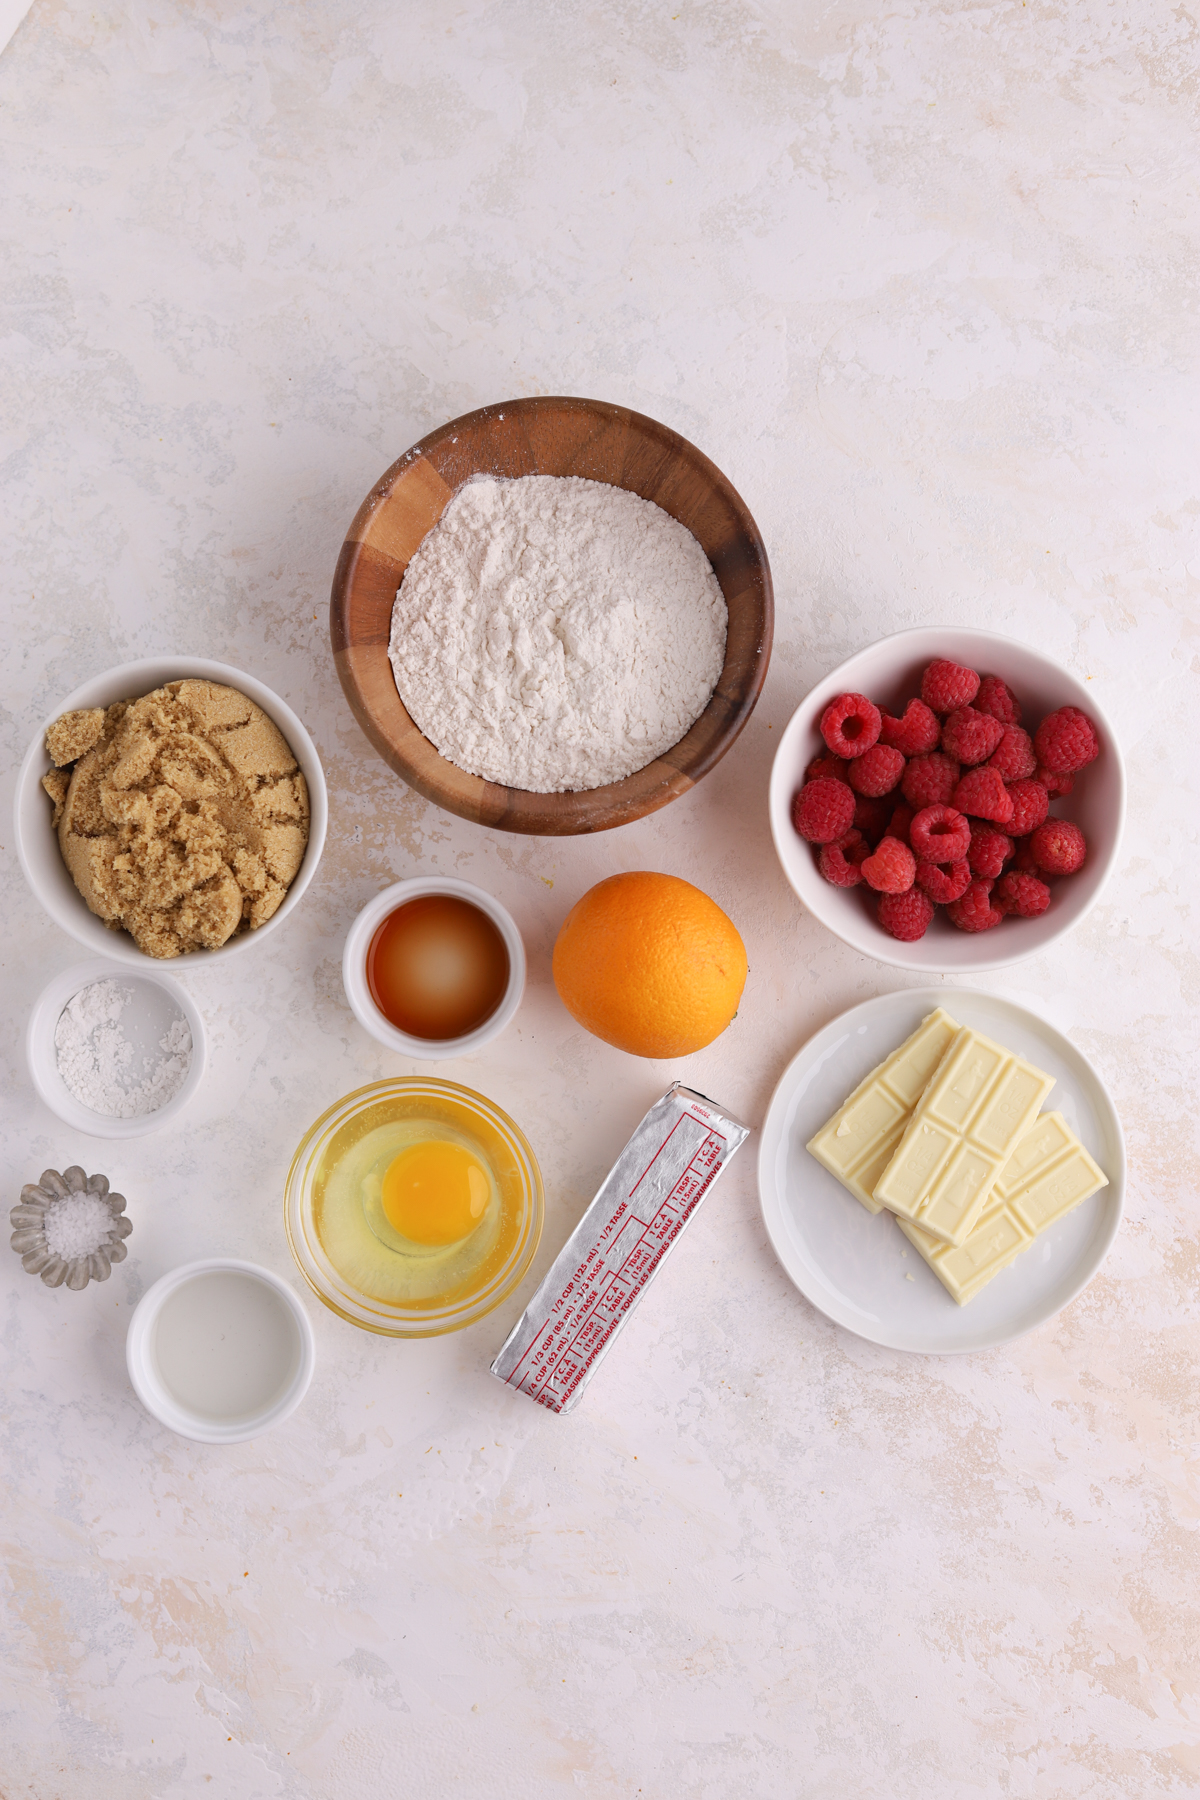 A stick of butter, a bowl of raspberries, some white chocolate and other ingredients. 